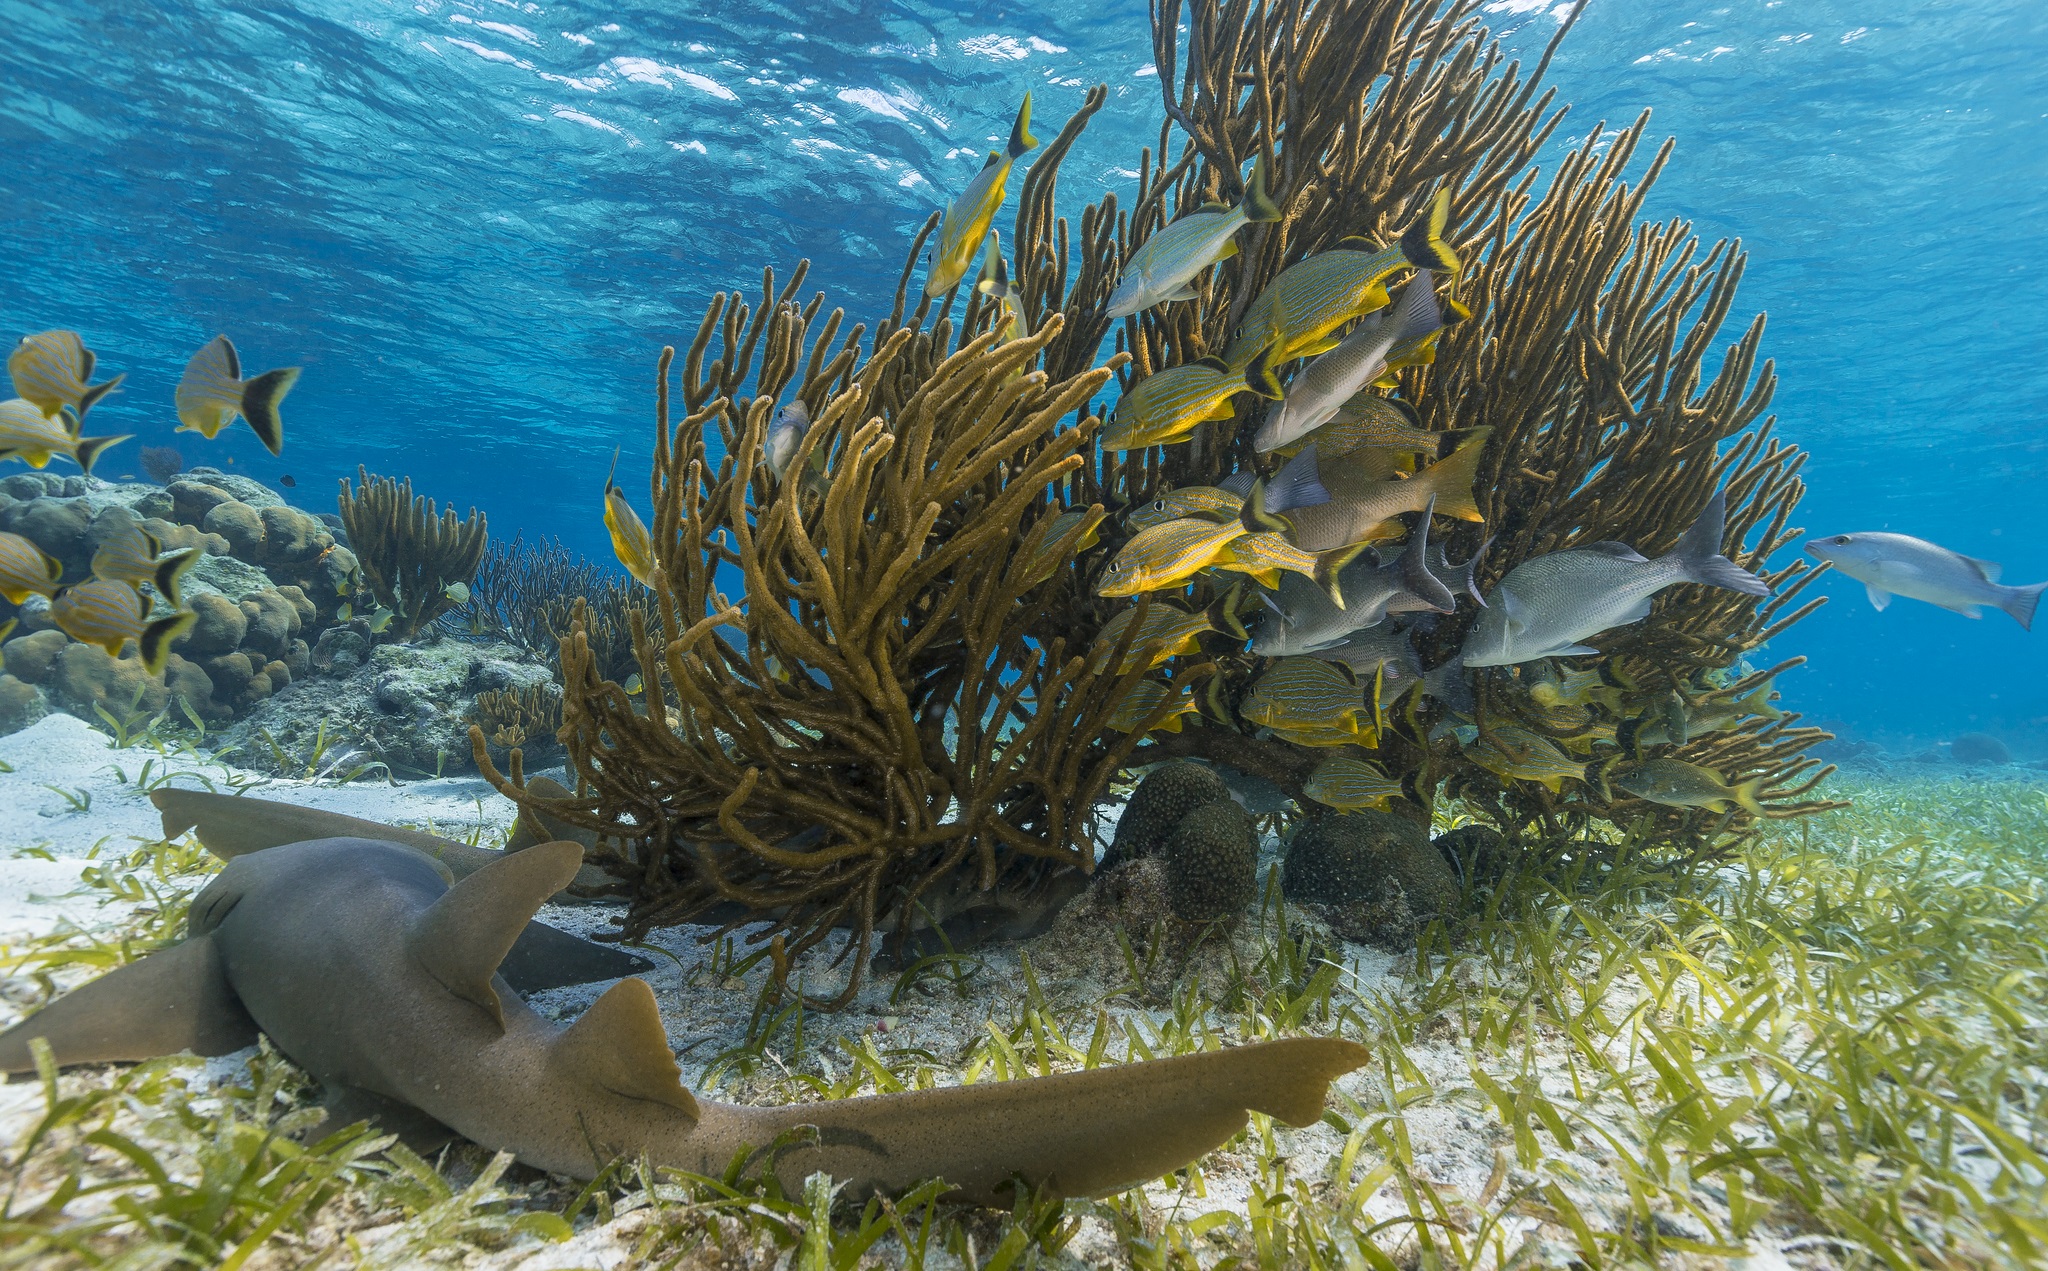 The Belize Barrier Reef is home to almost 1,400 species.